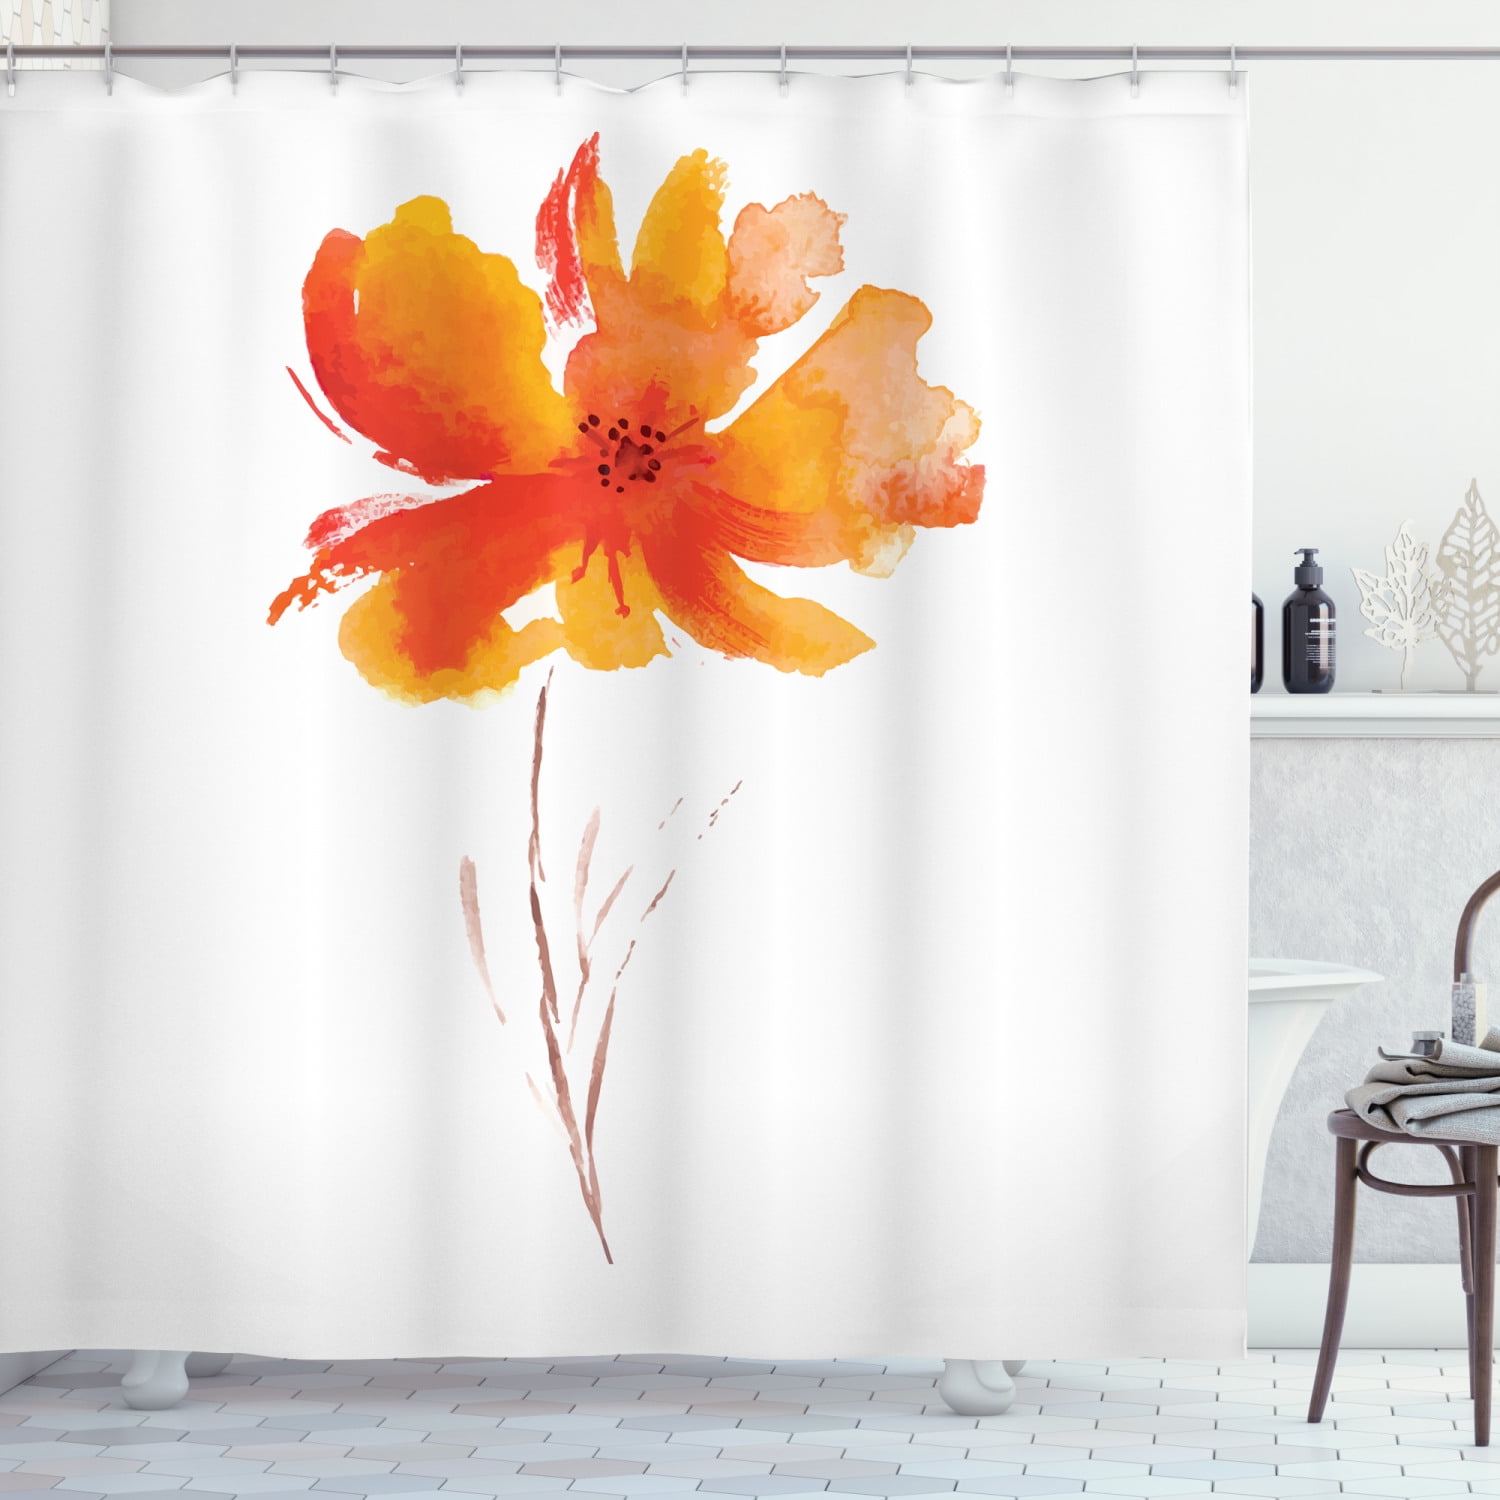 Single Poppy Flower on Plain Clear Background Nature Inspired RomanticCloth Fabric Bathroom Decor Set with Hooks 75 Inches White Orange ABAKUHAUS Watercolor Flower Shower Curtain 